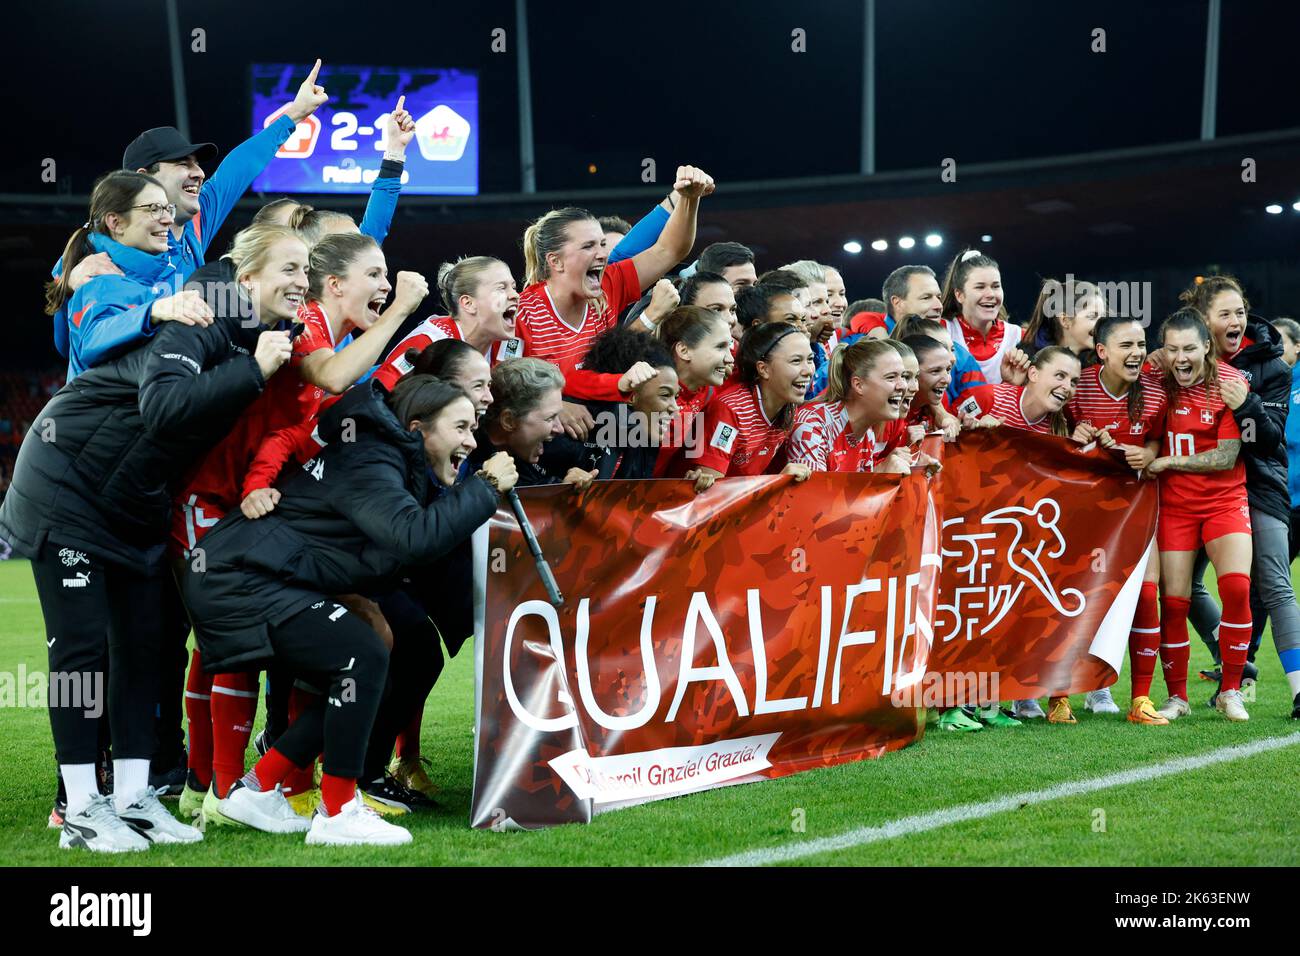 Soccer Football - FIFA Women's World Cup - UEFA Qualifiers - Switzerland v Wales - Stadion Letzigrund, Zurich, Switzerland - October 11, 2022 Switzerland players celebrate winning the match to qualify for the 2023 FIFA Women's World Cup REUTERS/Stefan Wermuth Stock Photo